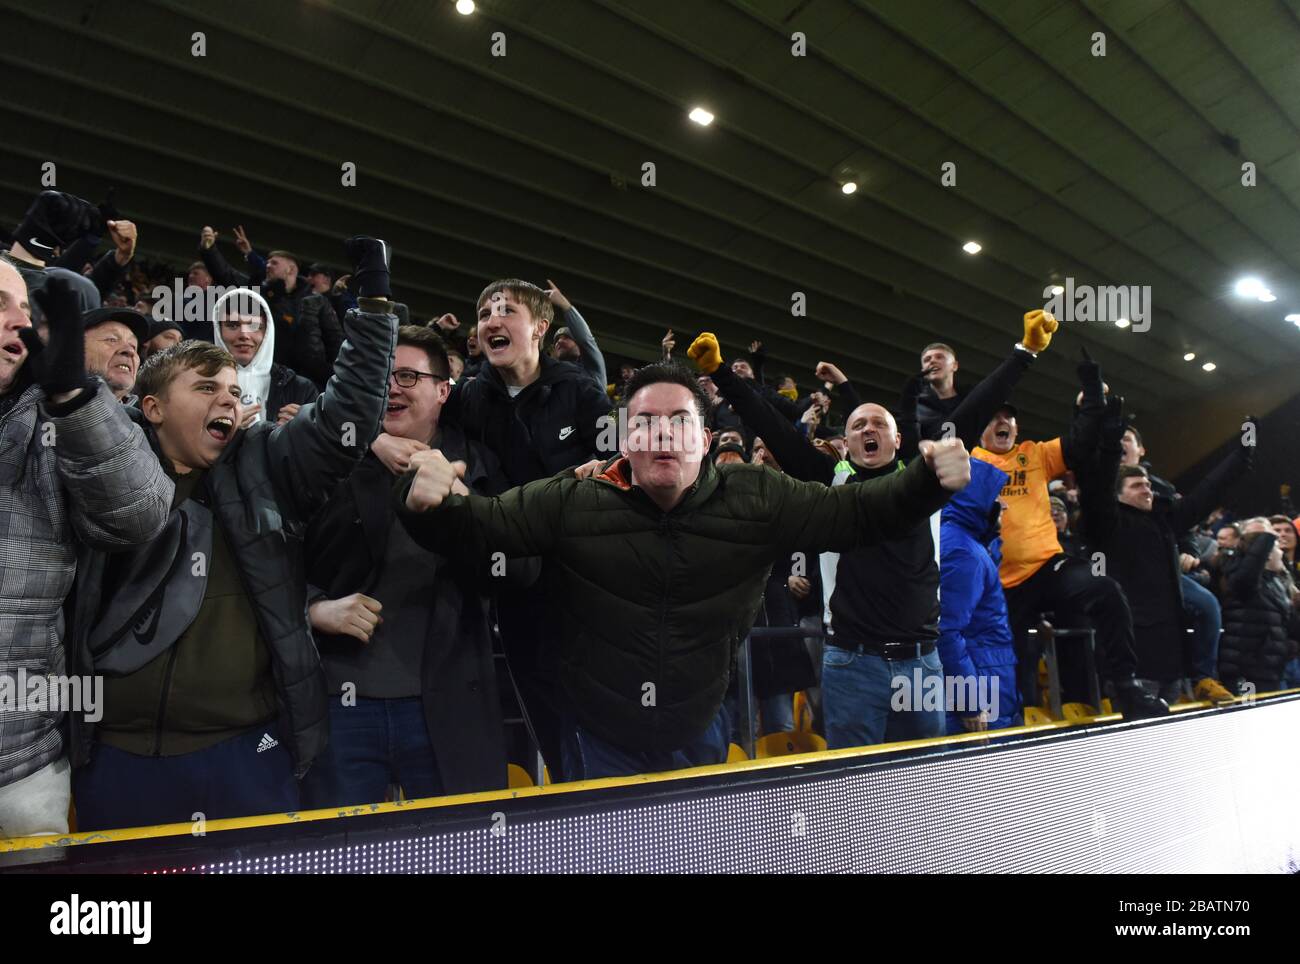 Celebrating football supporters fans of Wolverhampton Wanderers Stock Photo